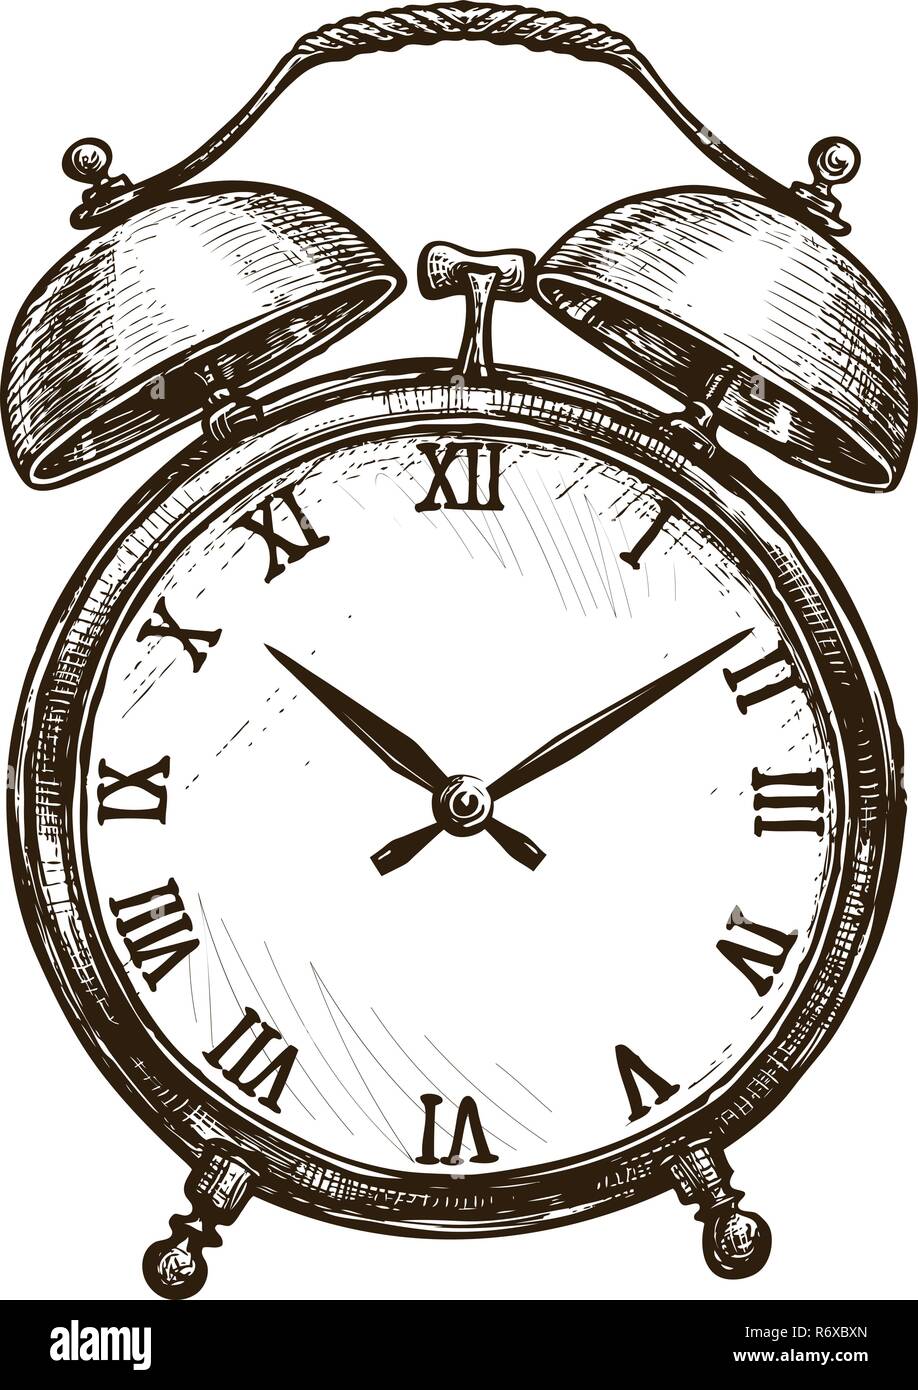 Ringing Alarm Clock Drawing High-Res Vector Graphic - Getty Images